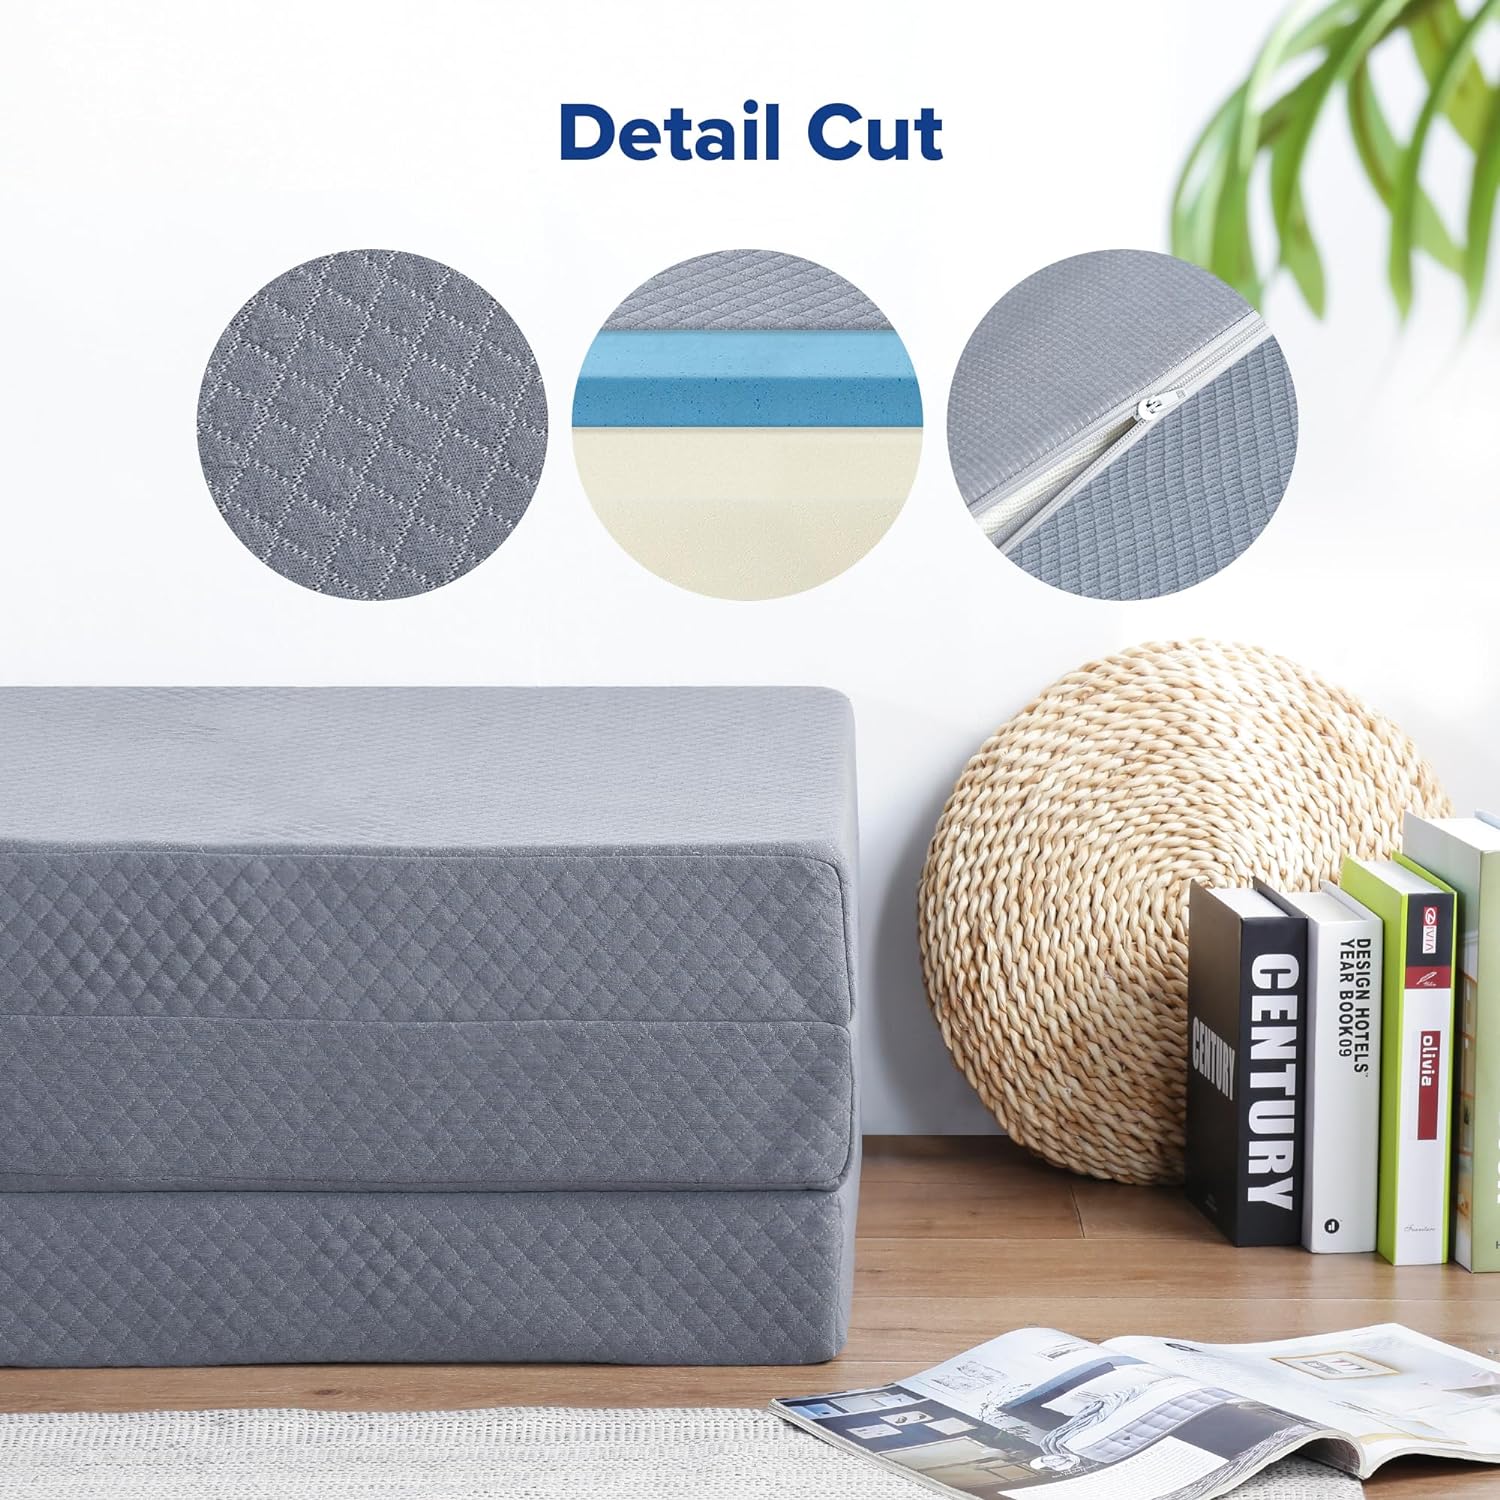 https://bigbigmart.com/wp-content/uploads/2023/09/Olee-Sleep-Tri-Folding-Memory-Foam-Topper-4-inch-Grey-Narrow-Twin-Play-Mat-Foldable-bed-Guest-bed-Portable-bed3.jpg